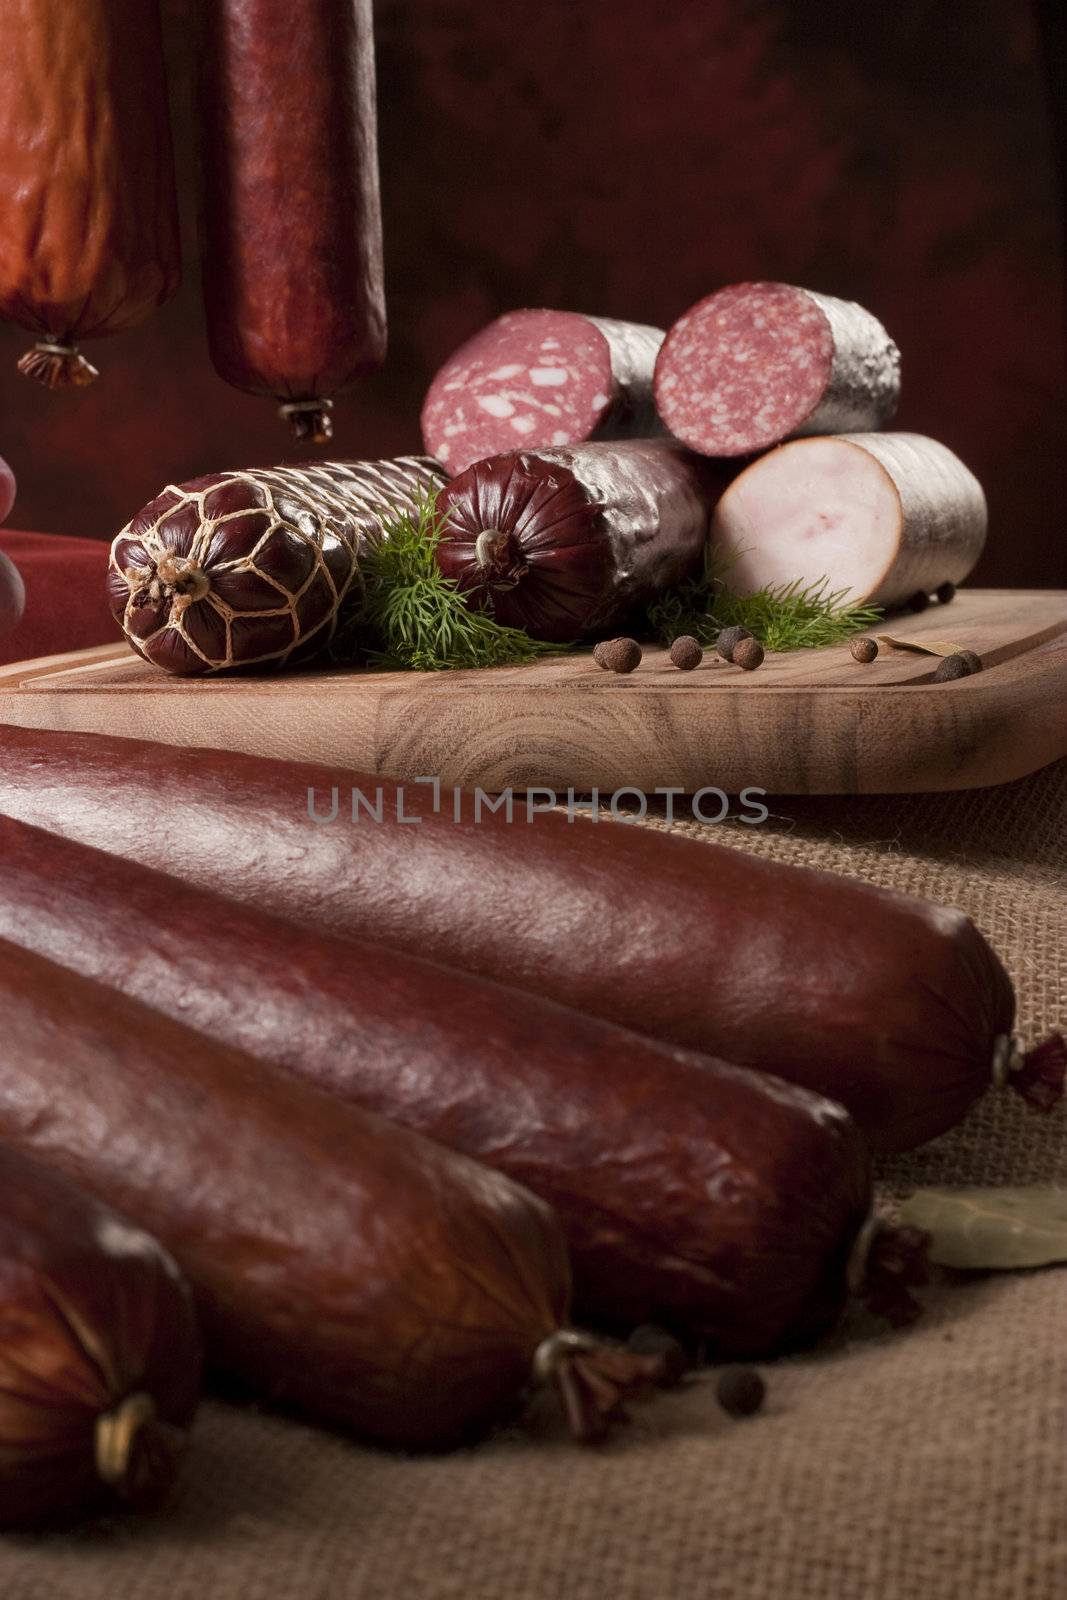 A composition of different sorts of sausages by igor_stramyk